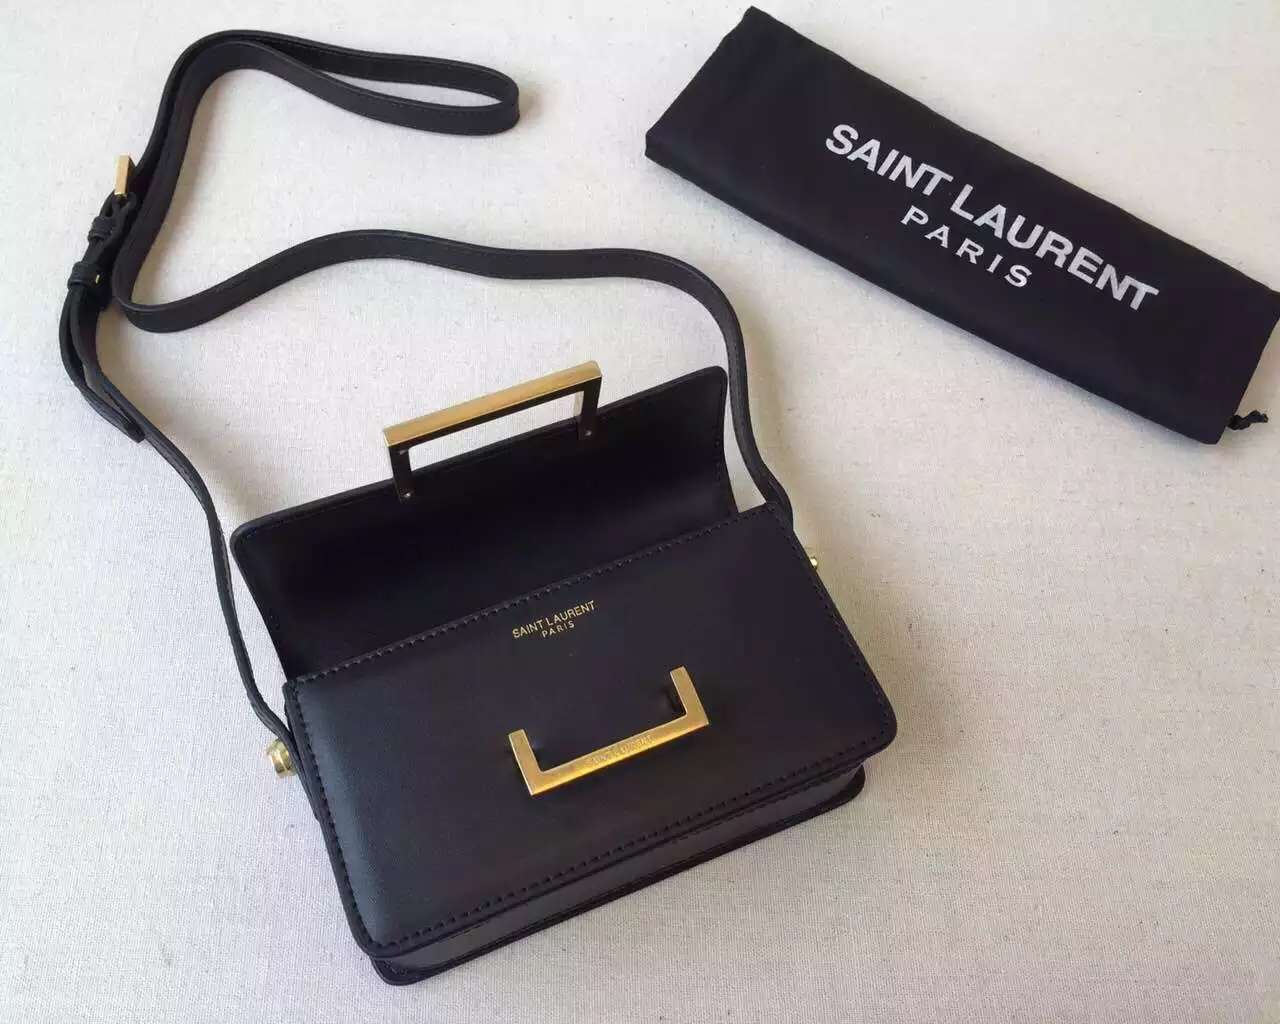 2015 Cheap YSL Out-Sale with Free Shipping-Saint Laurent Classic Small Lulu Leather Bag in Black Calfskin Leather - Click Image to Close